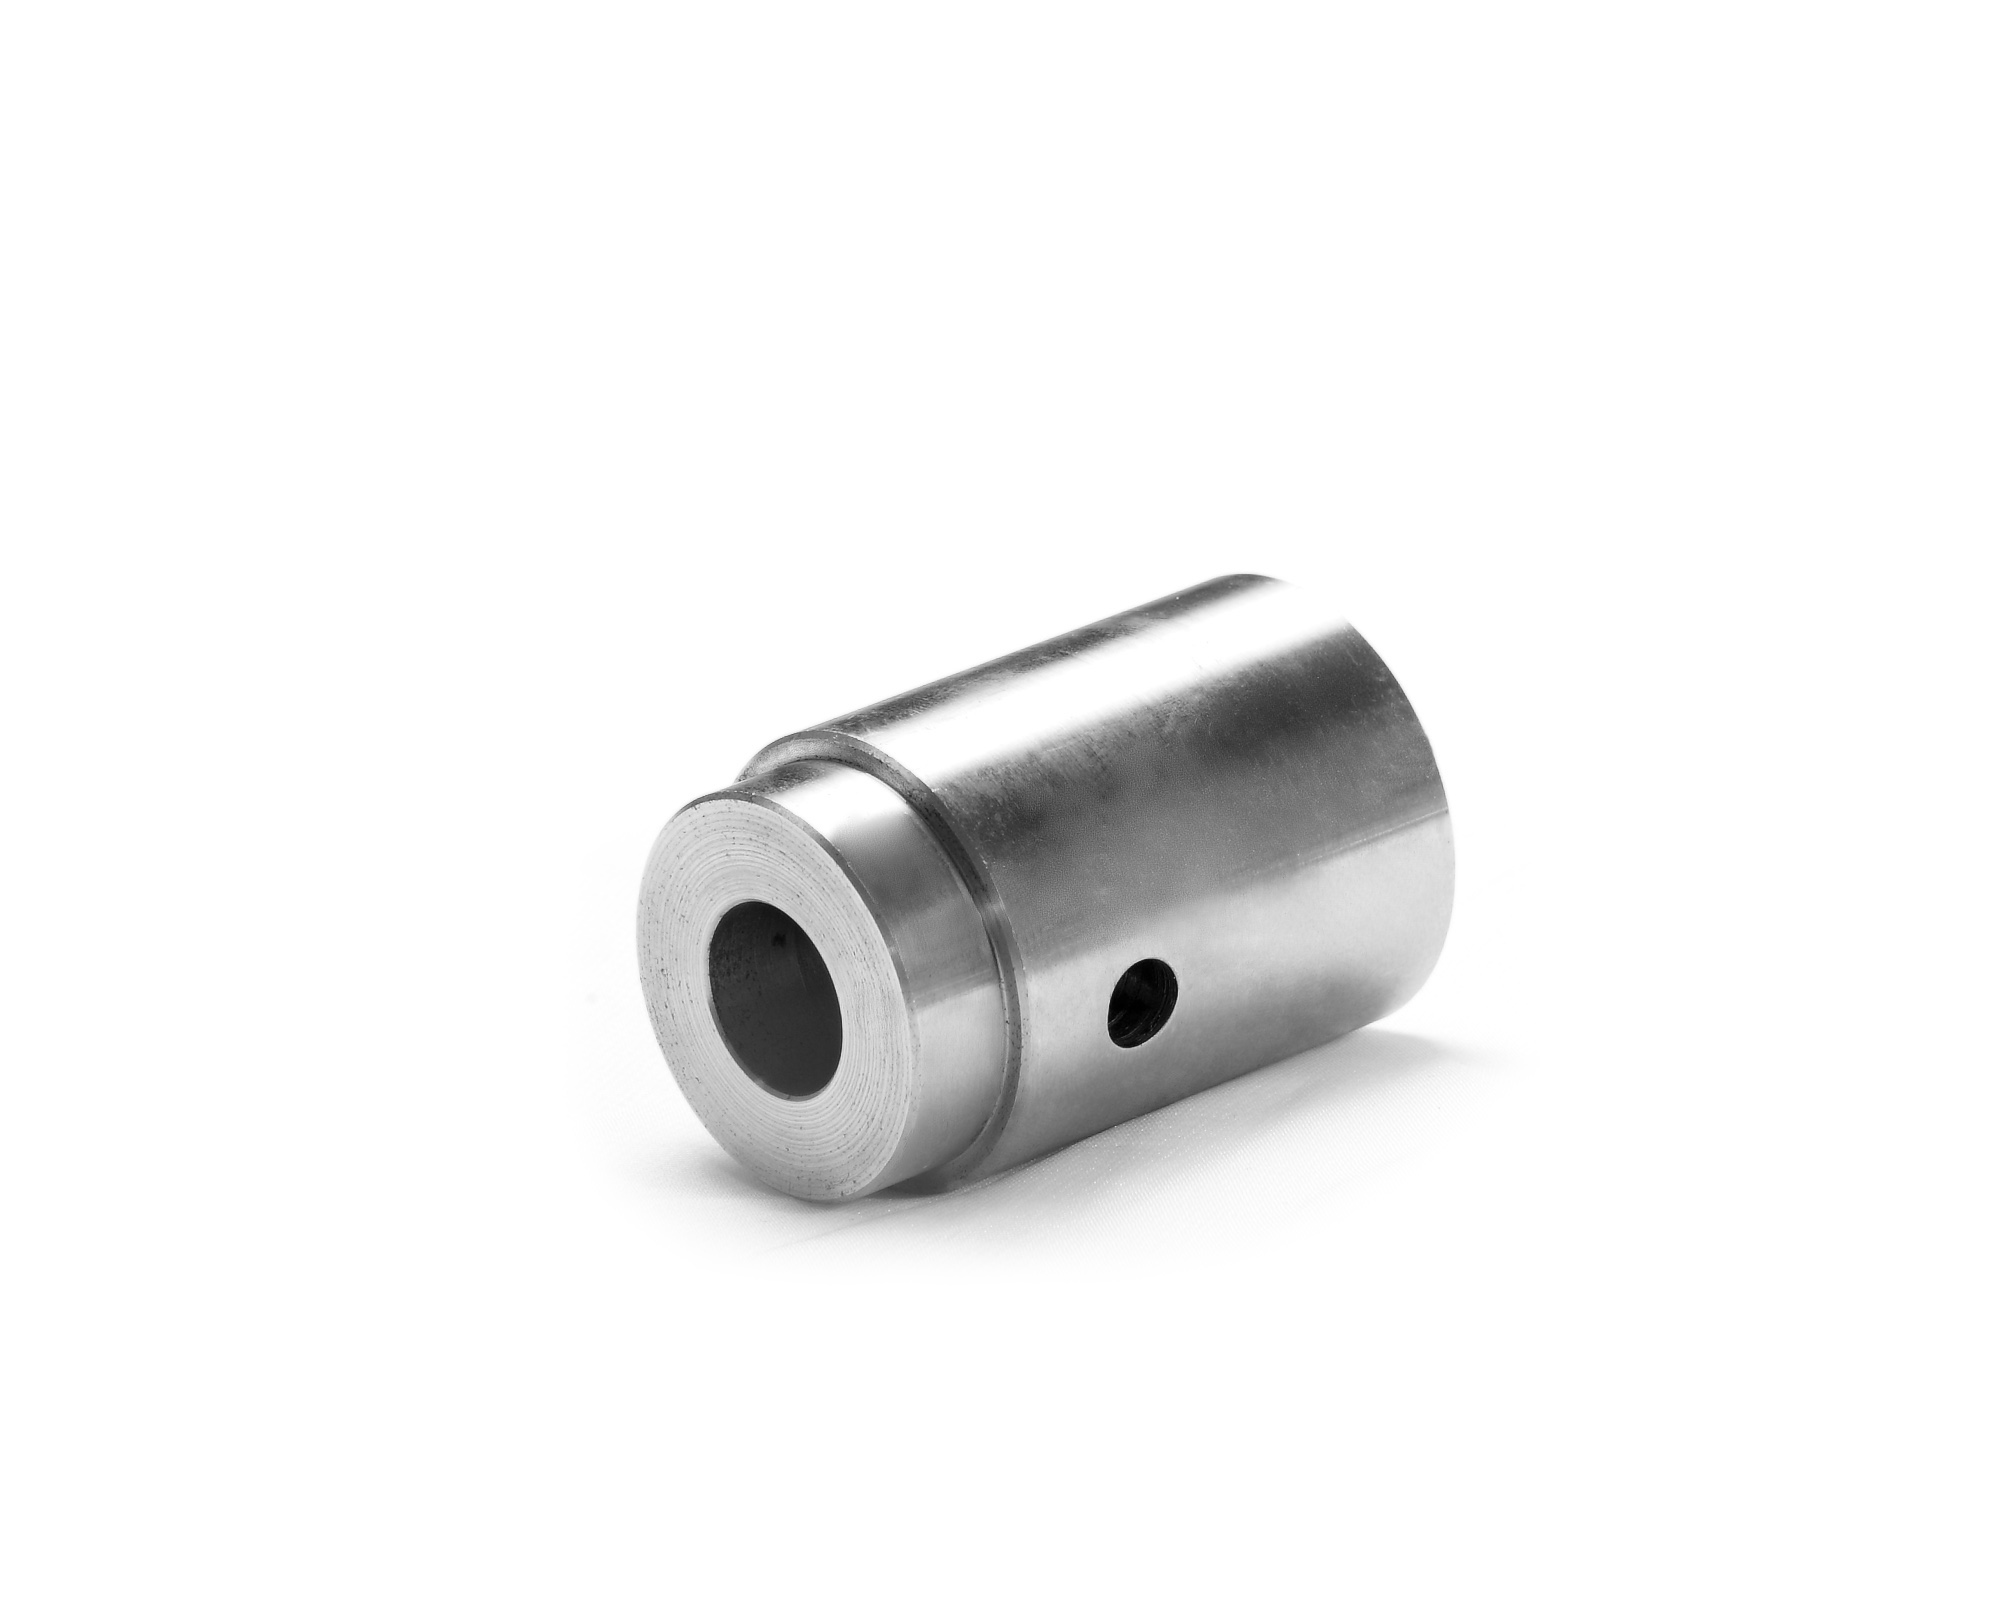 CNC-machined-heigh-precision-stainless-steel-shaft_Rissun-Components_Sourcing_Machining.jpg